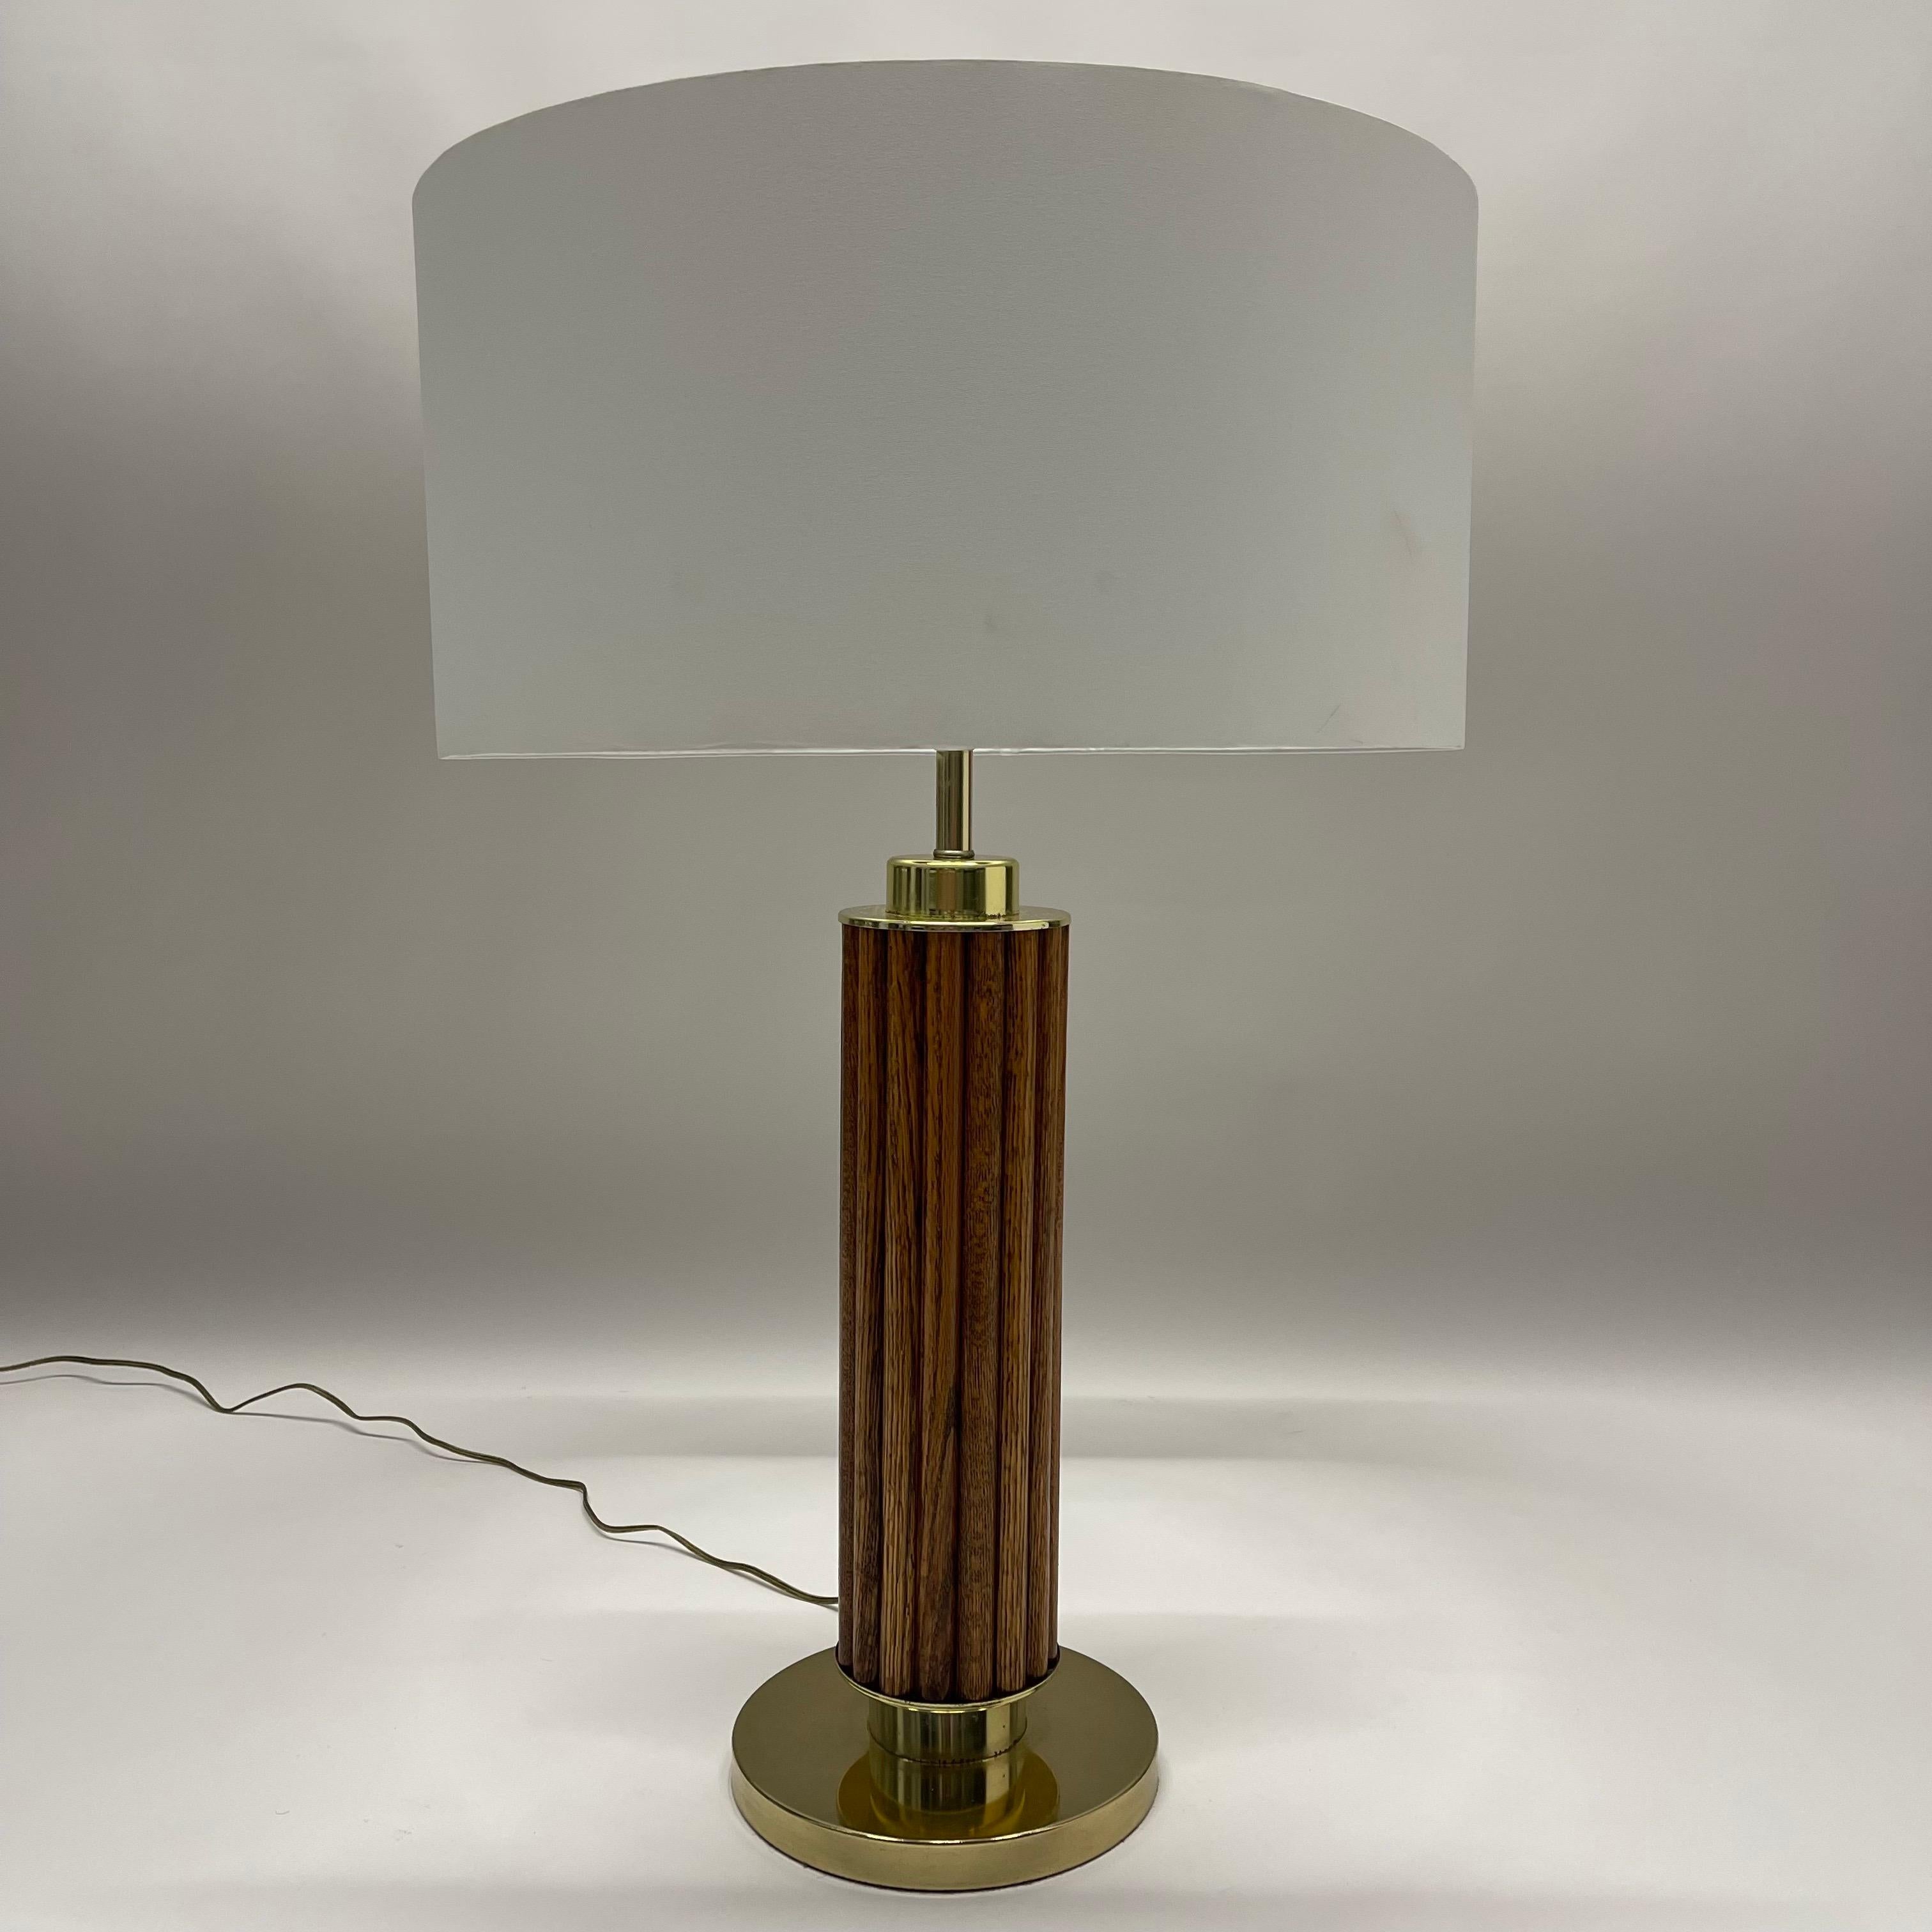 Midcentury American Craft table lamp rendered in reeded oak with brass appointments, circa 1970s.

24.5